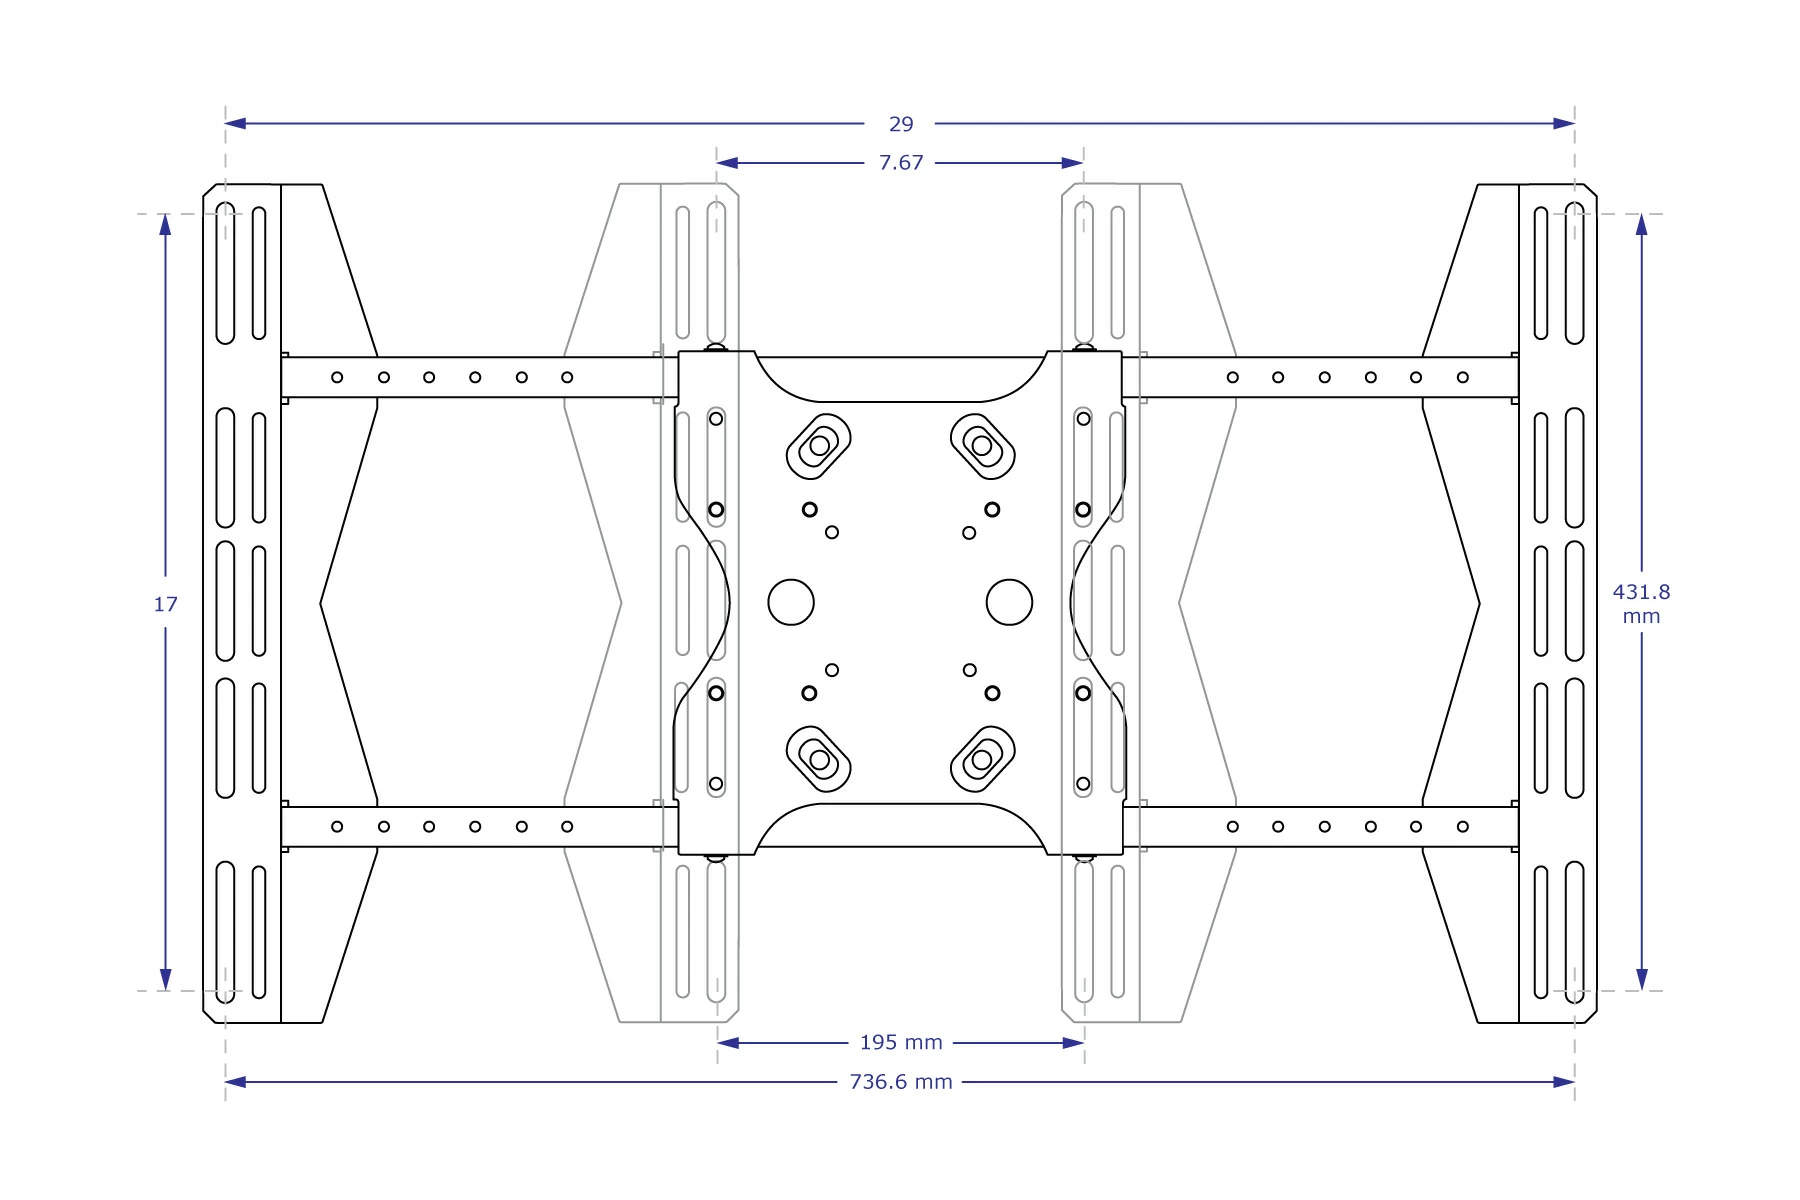 MSU4x6 large VESA adapter specification drawing front view shown at maximum and minimum widths with measurements